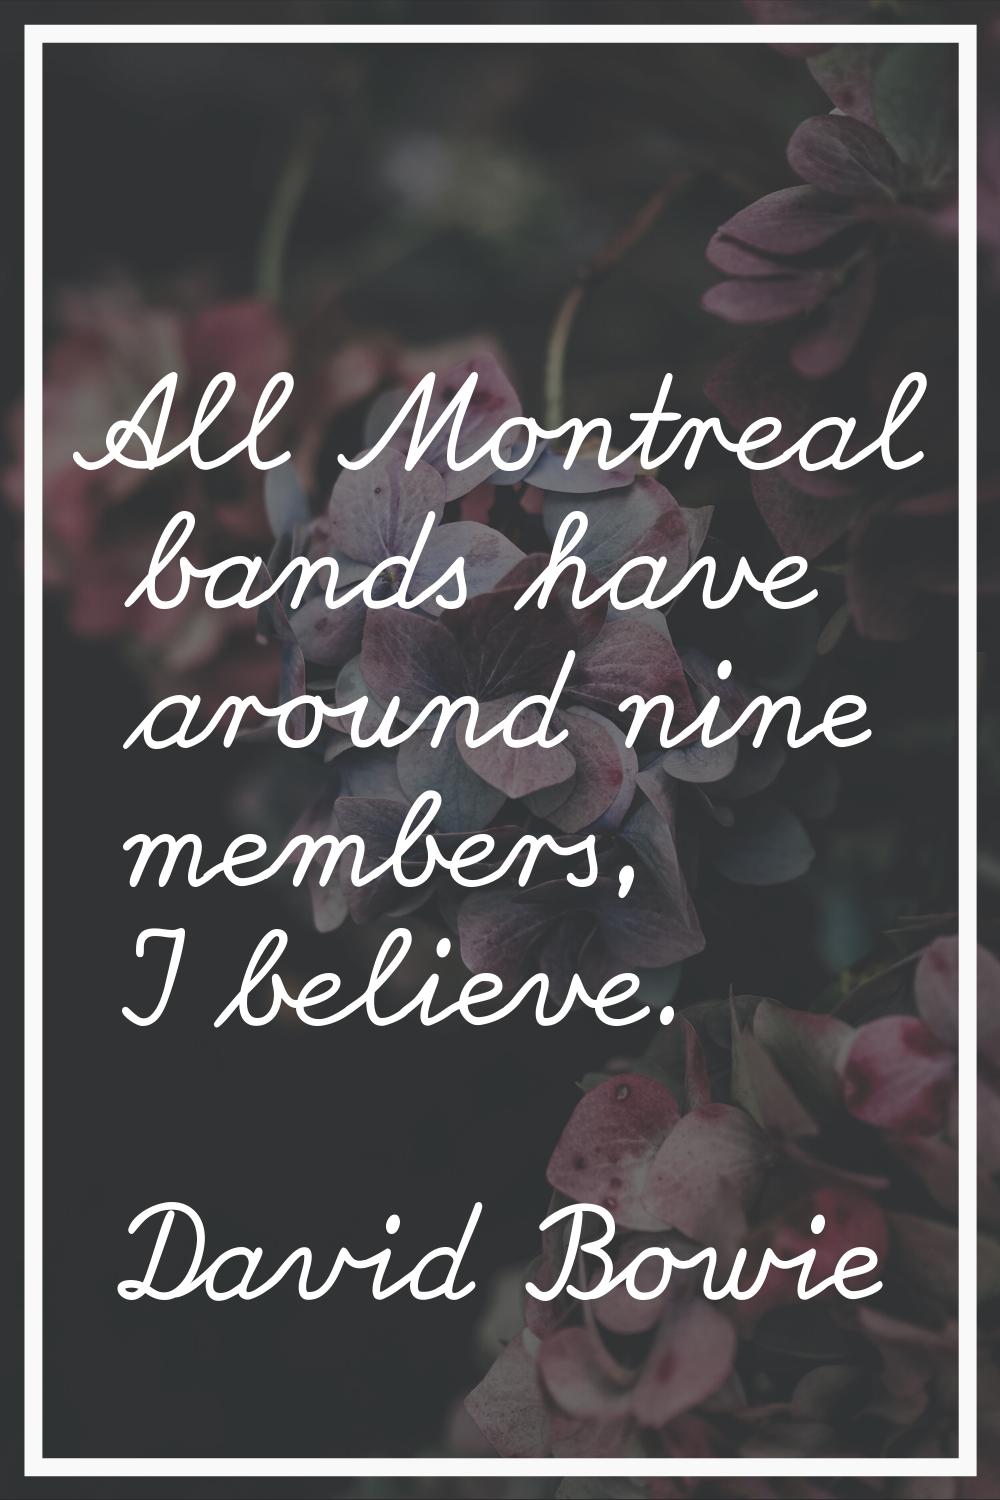 All Montreal bands have around nine members, I believe.